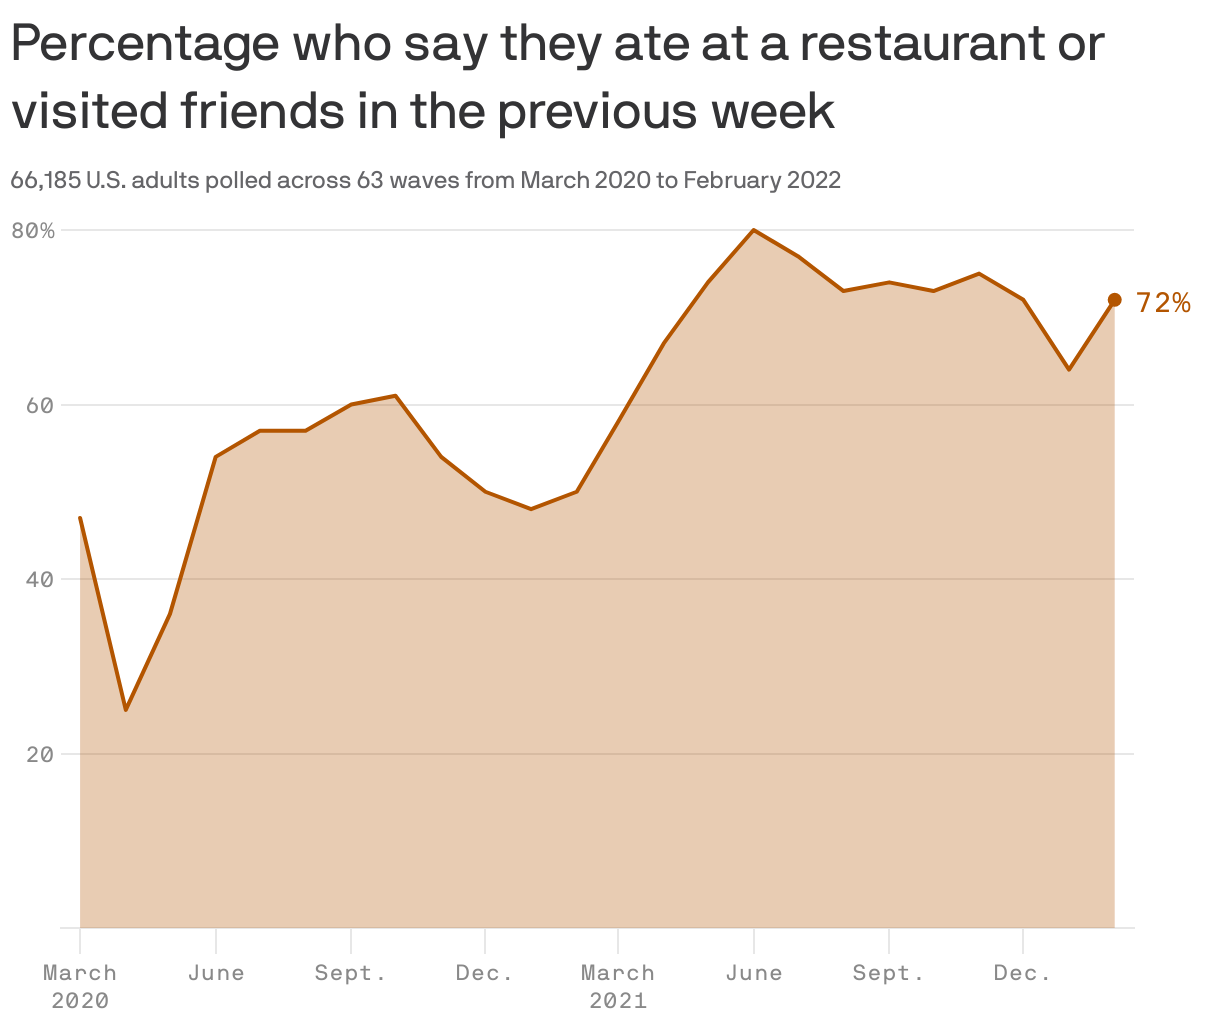 Percentage who say they ate at a restaurant or visited friends in the previous week